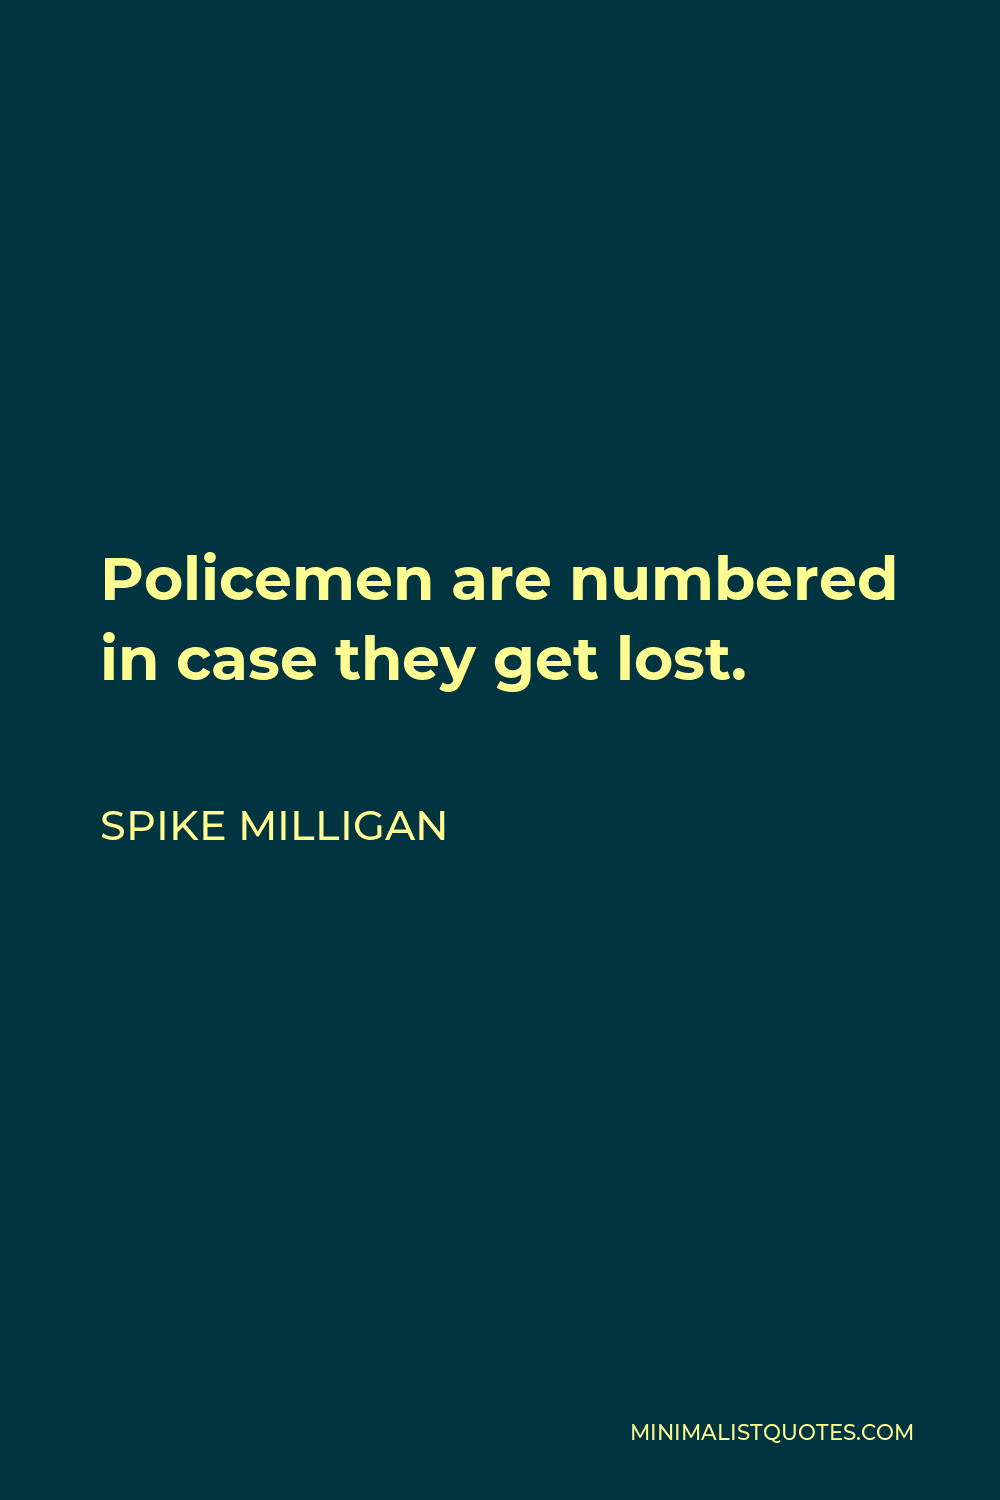 Spike Milligan Quote - Policemen are numbered in case they get lost.